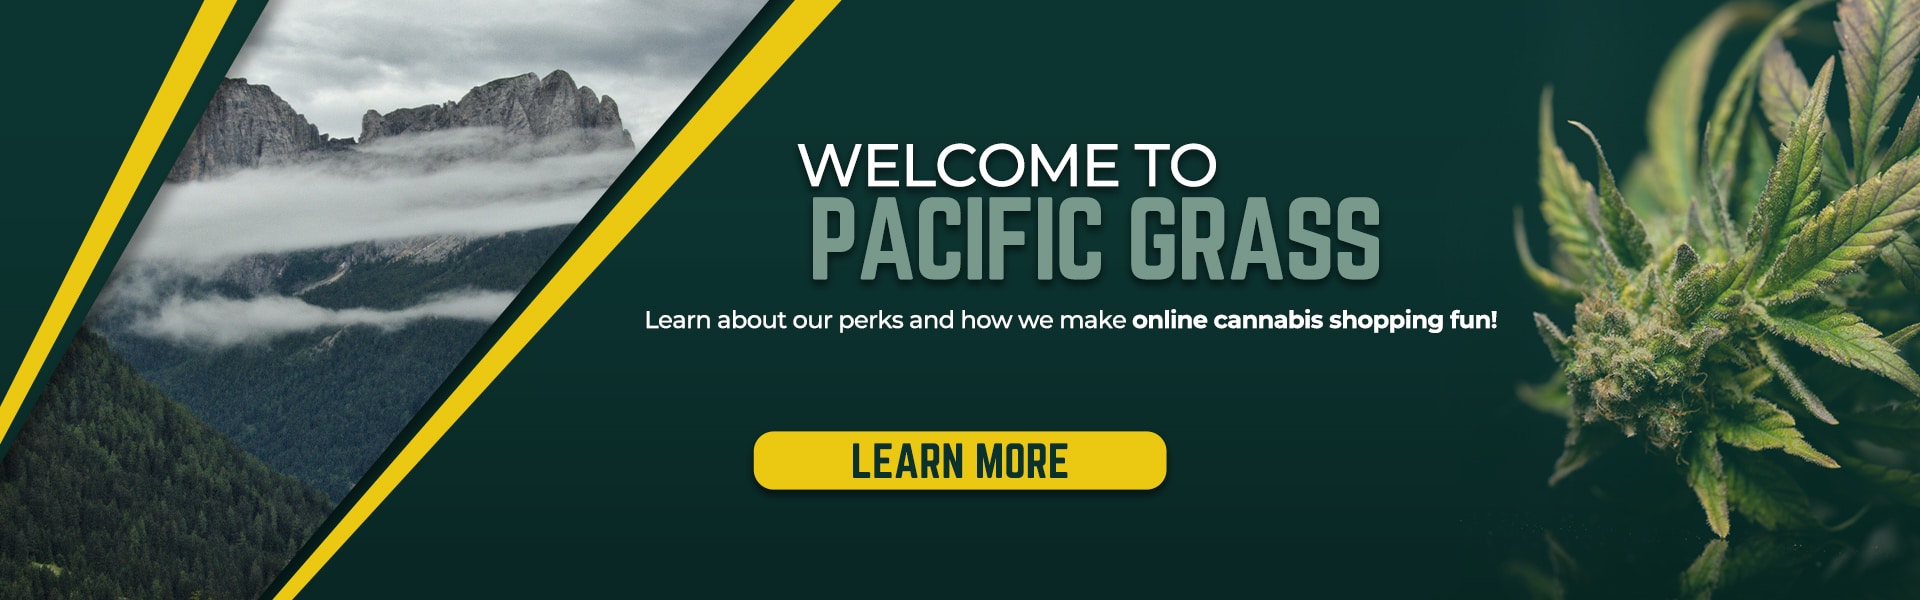 Pg Welcome Banner 1920x600 2